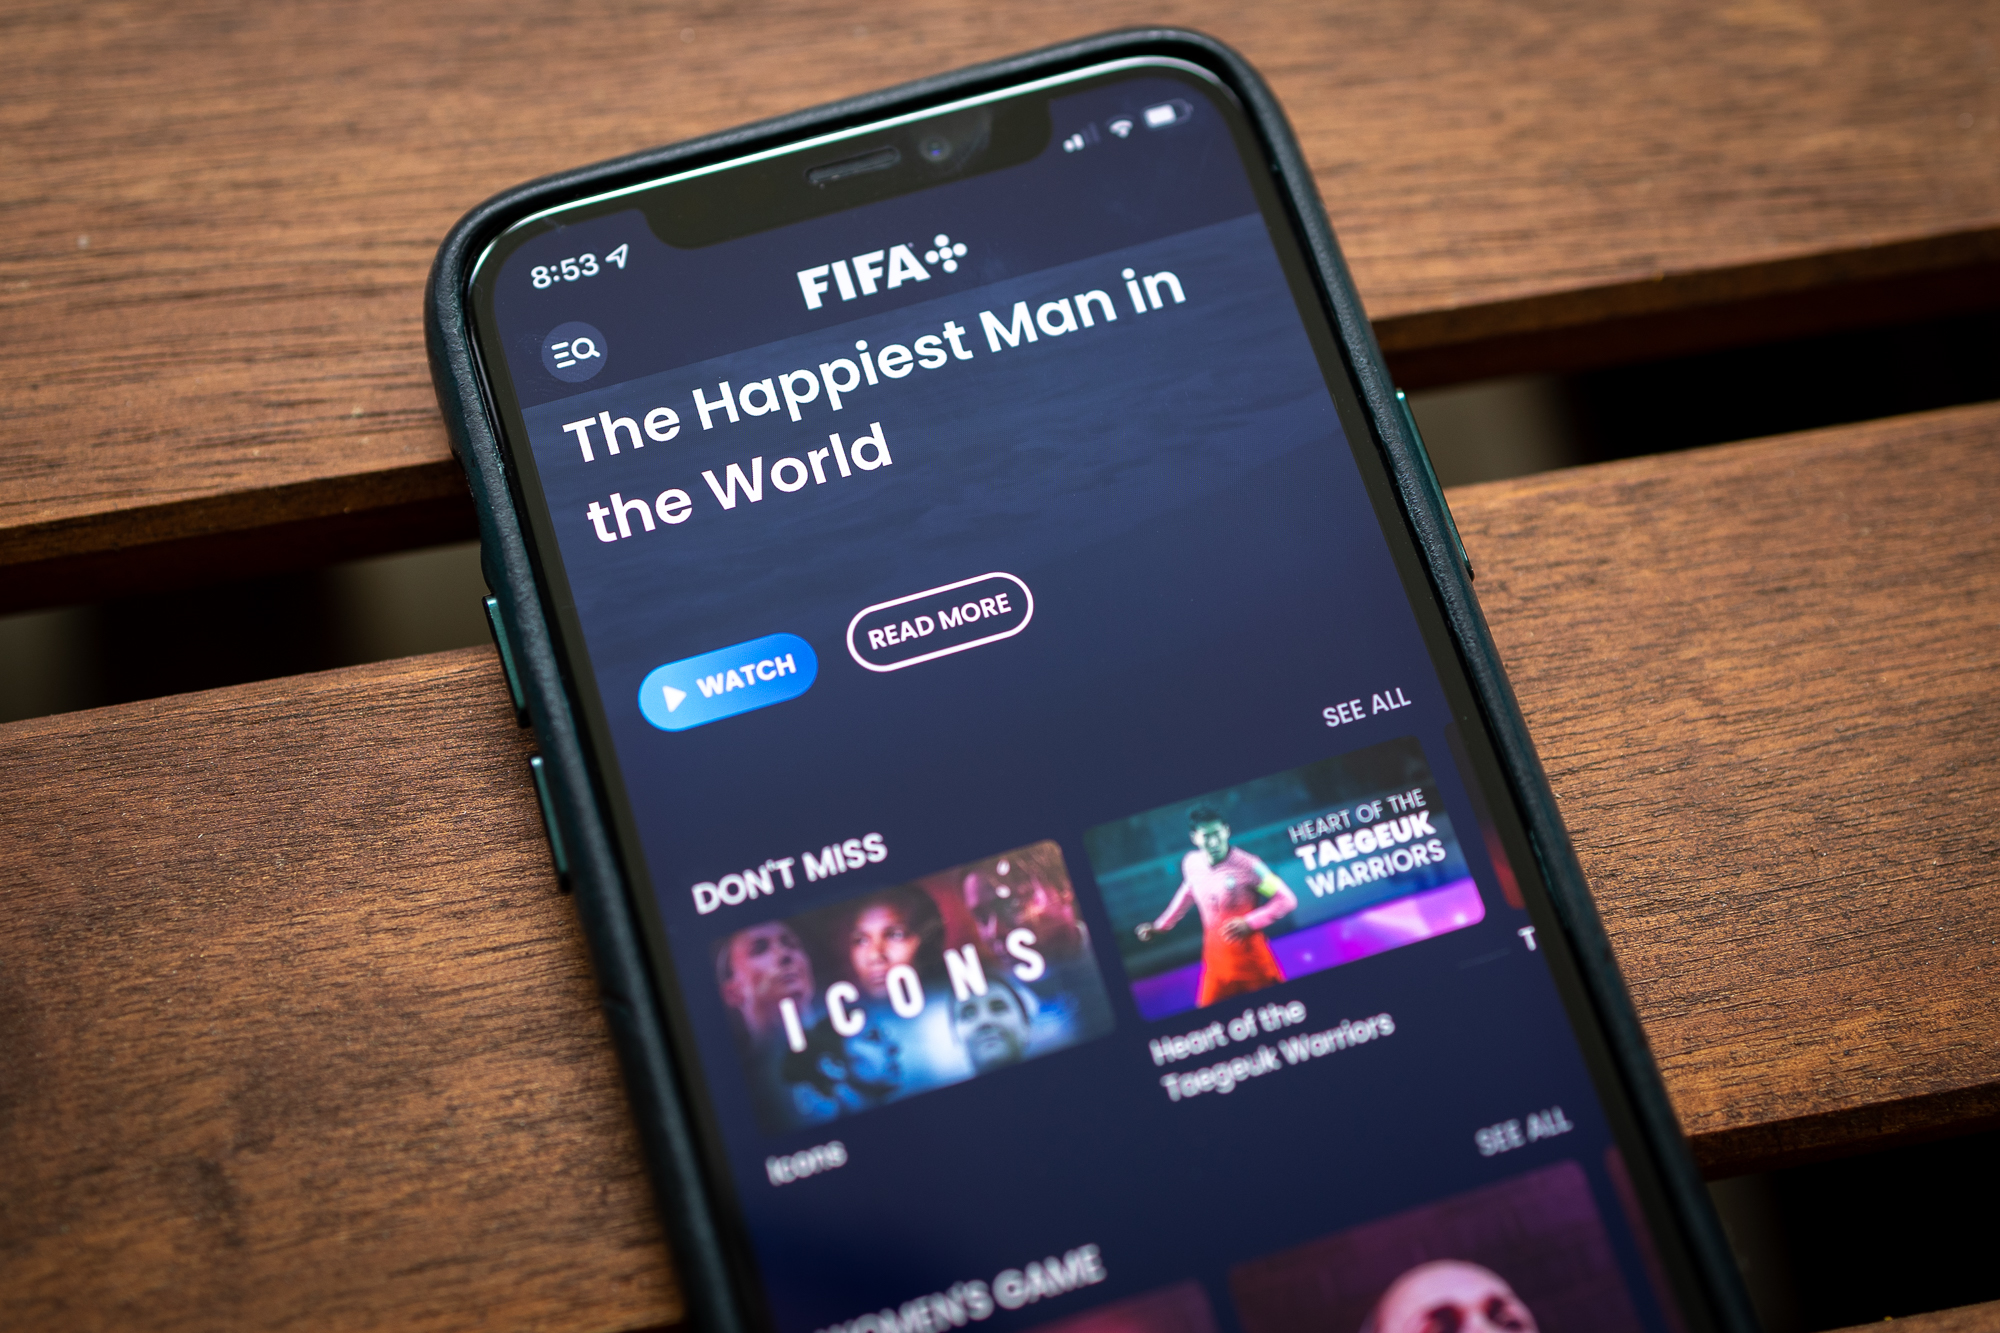 FIFA+ arrives just in time for the World Cup